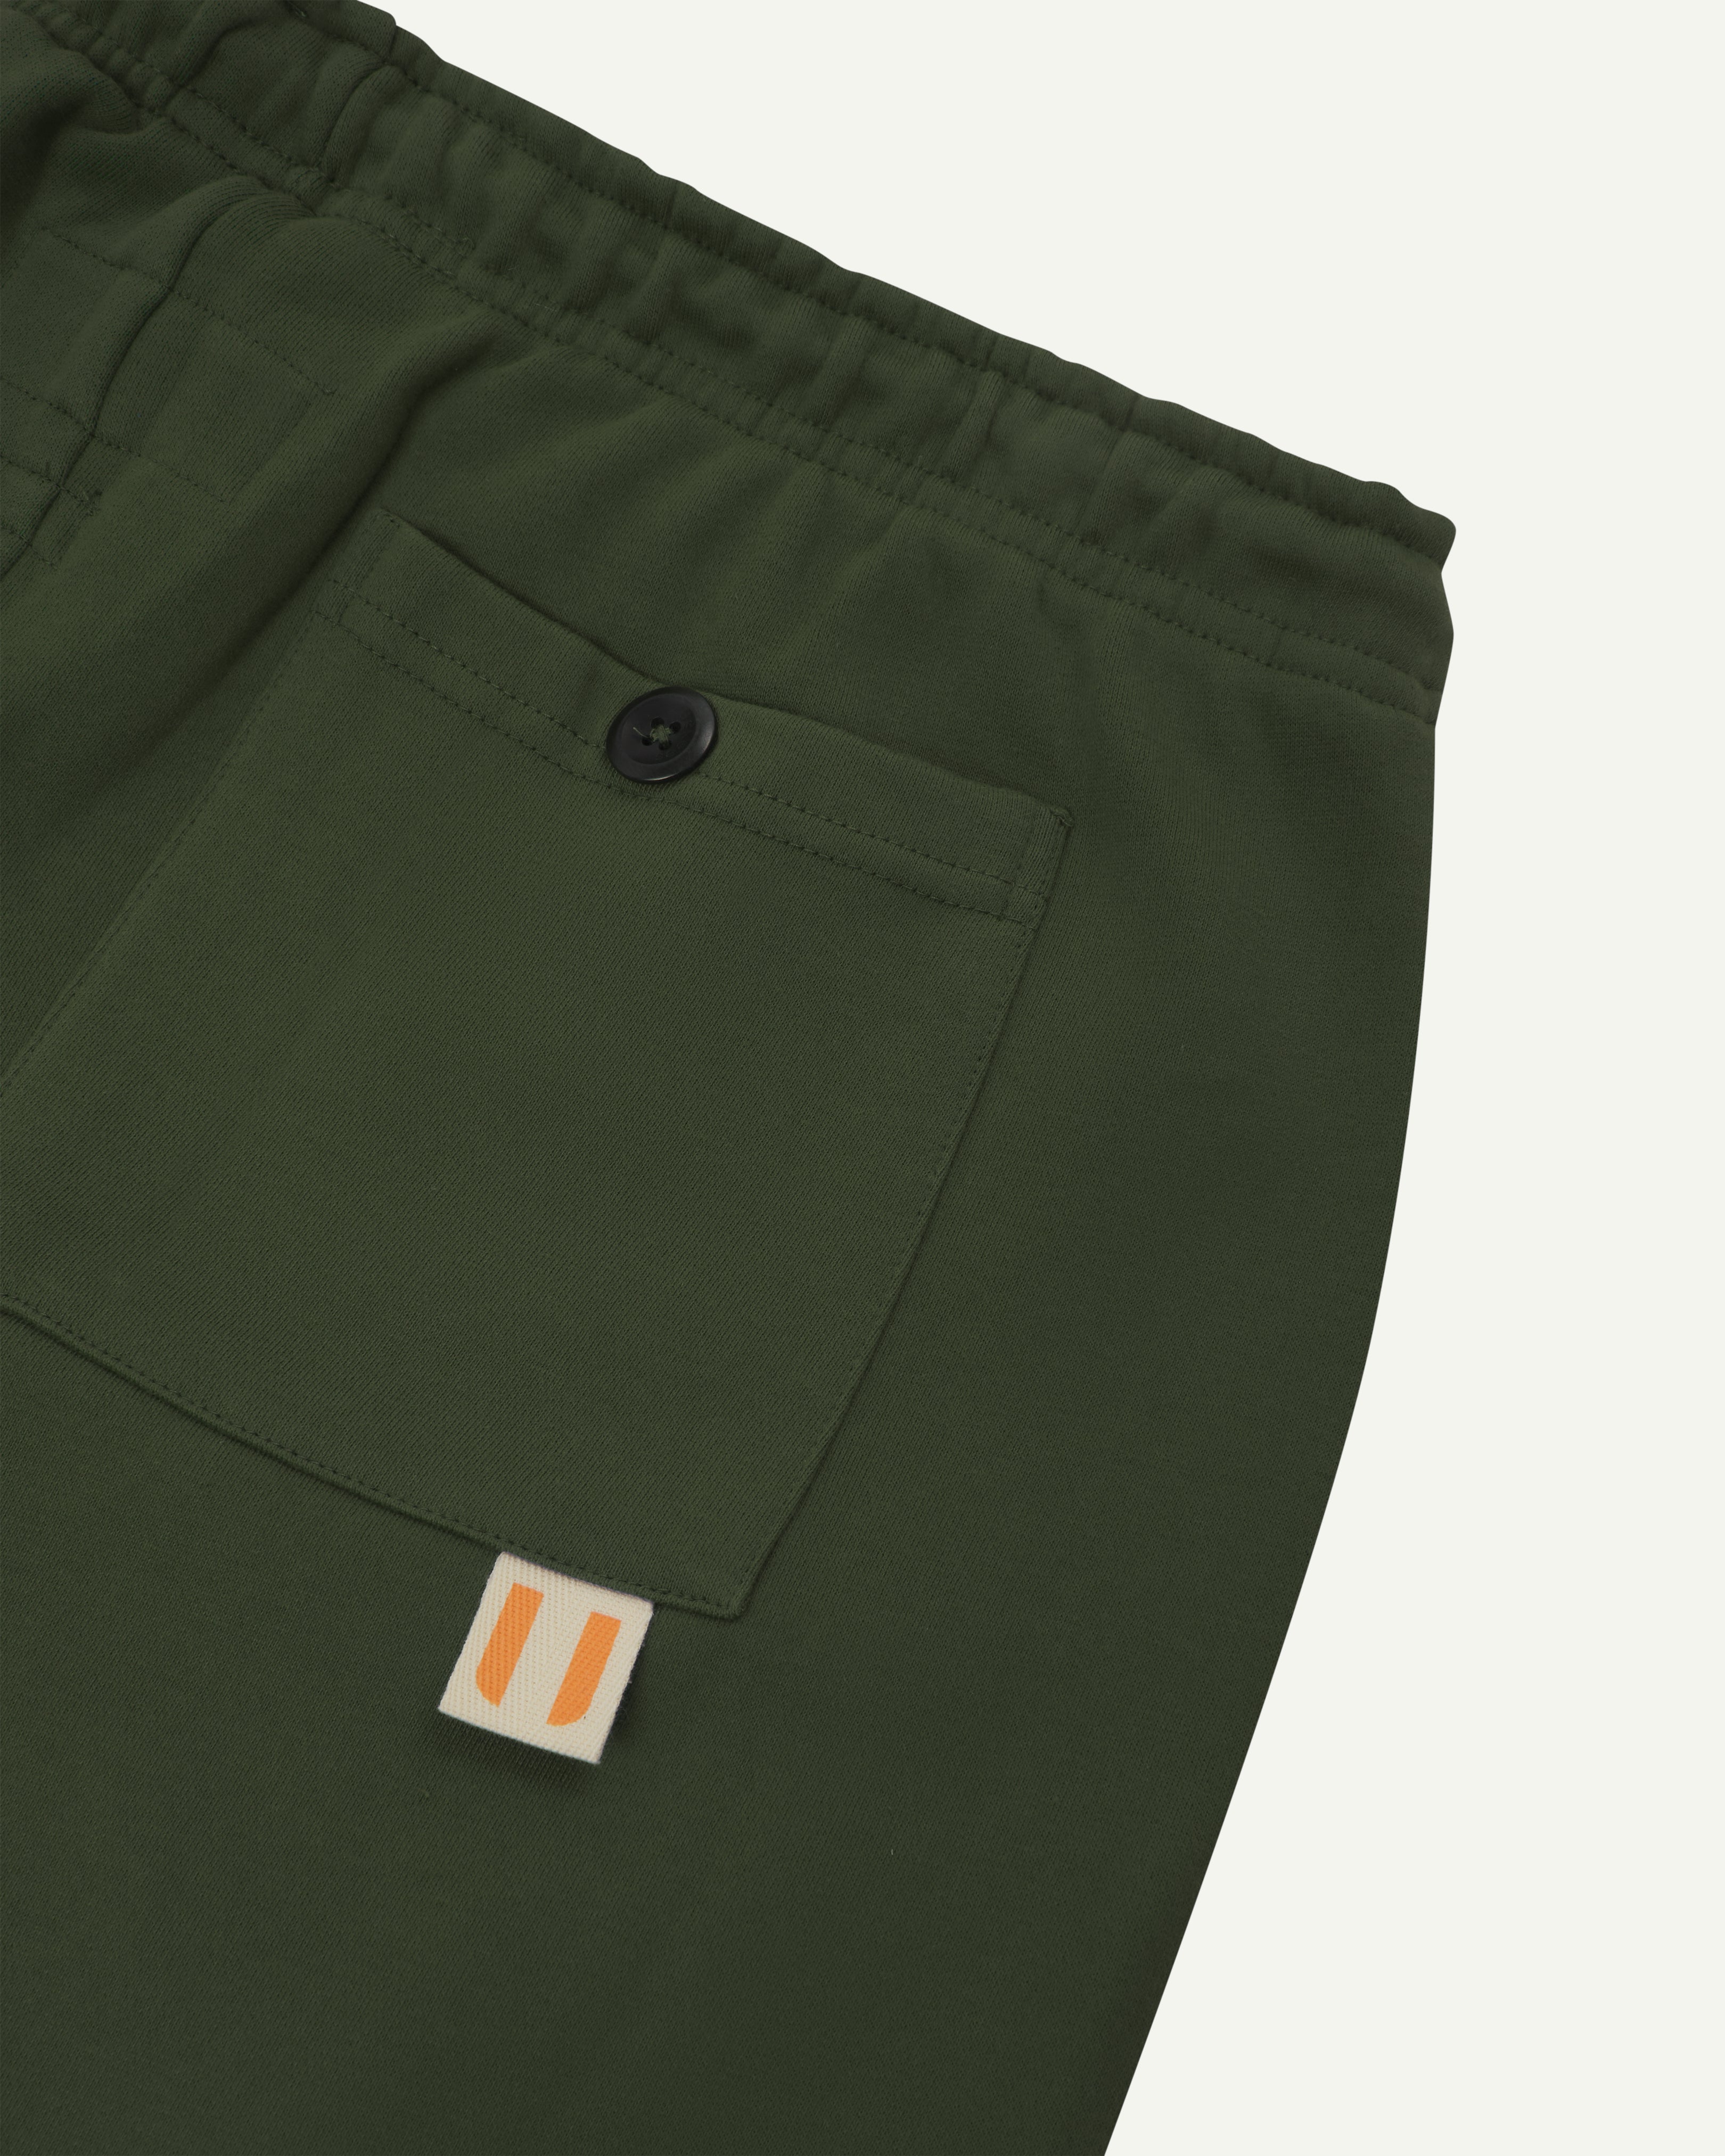 Back close view of organic cotton Joggers for men by Uskees showing the buttoned back pocket and logo label.